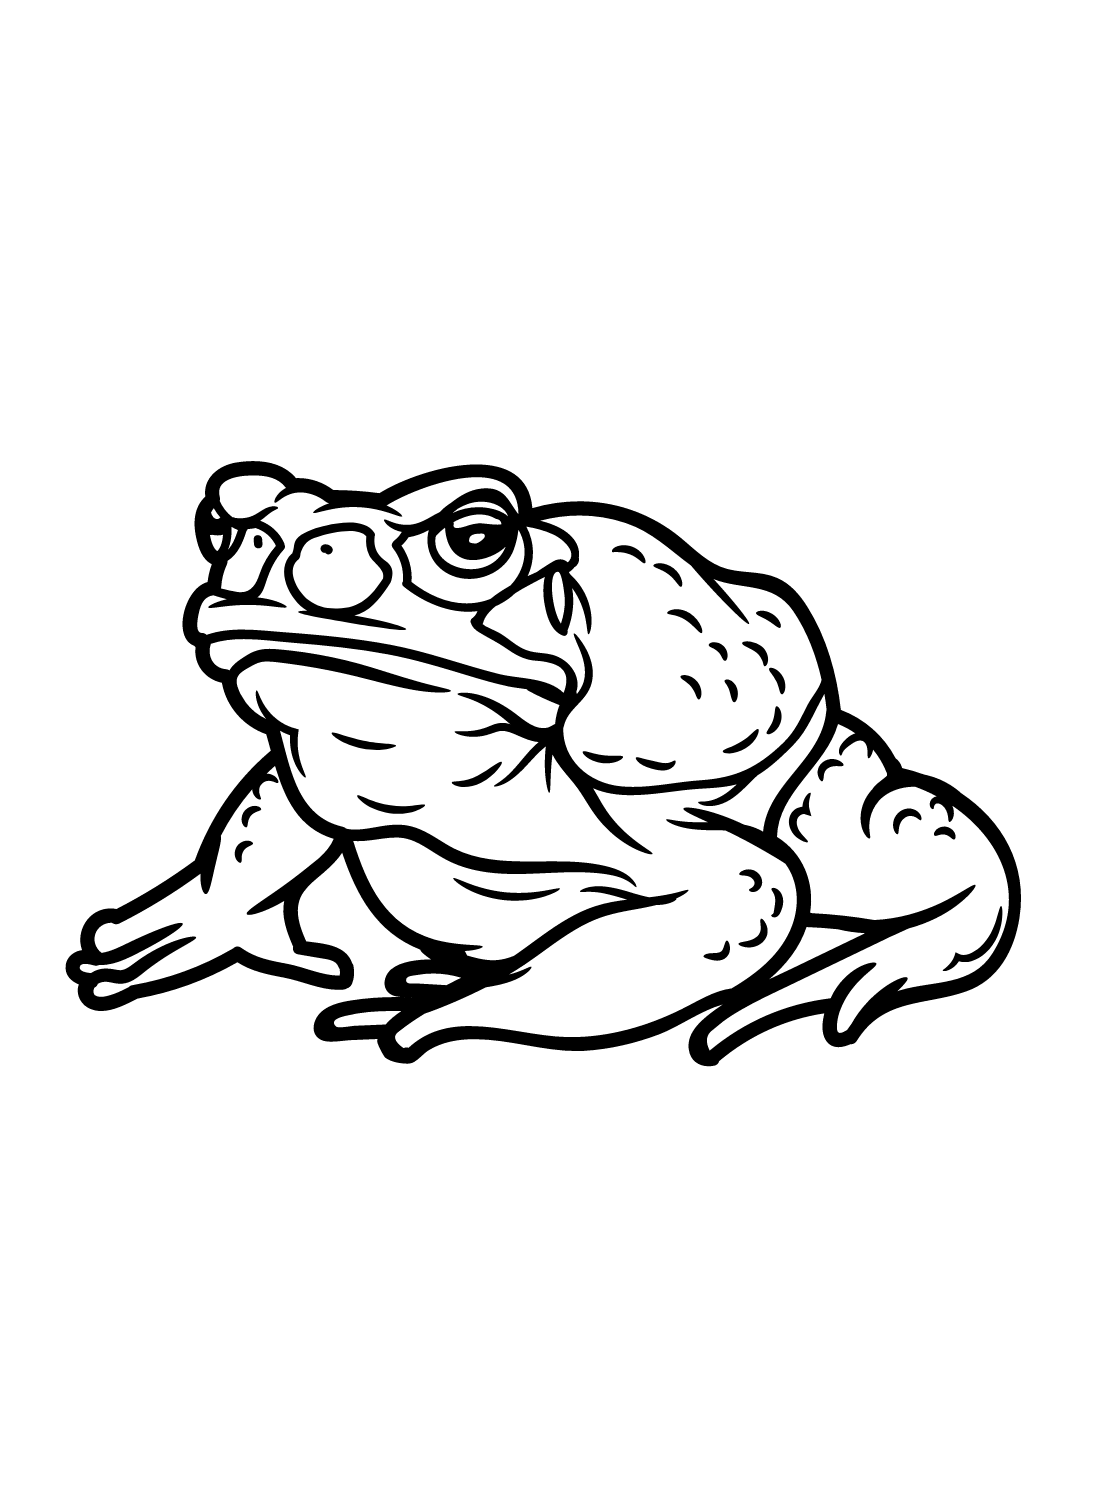 Toad Simple Coloring Page - Free Printable Coloring Pages